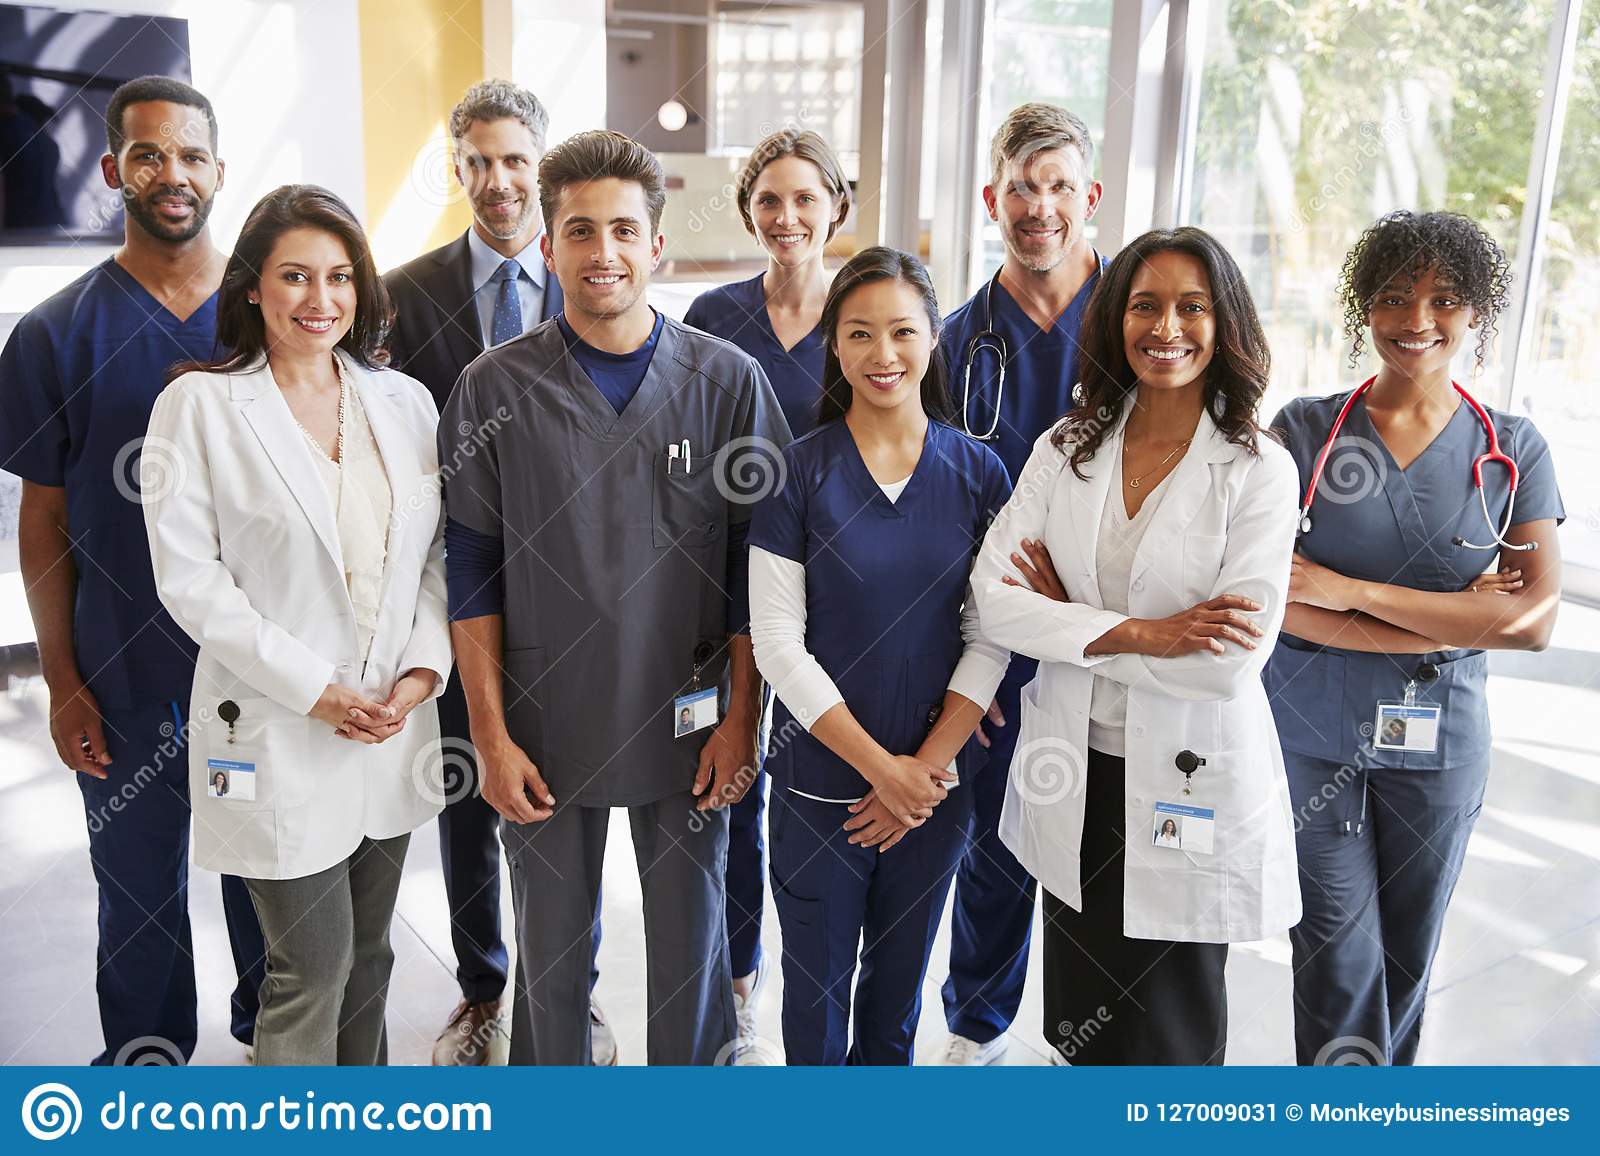 team-healthcare-workers-hospital-smiling-to-camera-team-healthcare